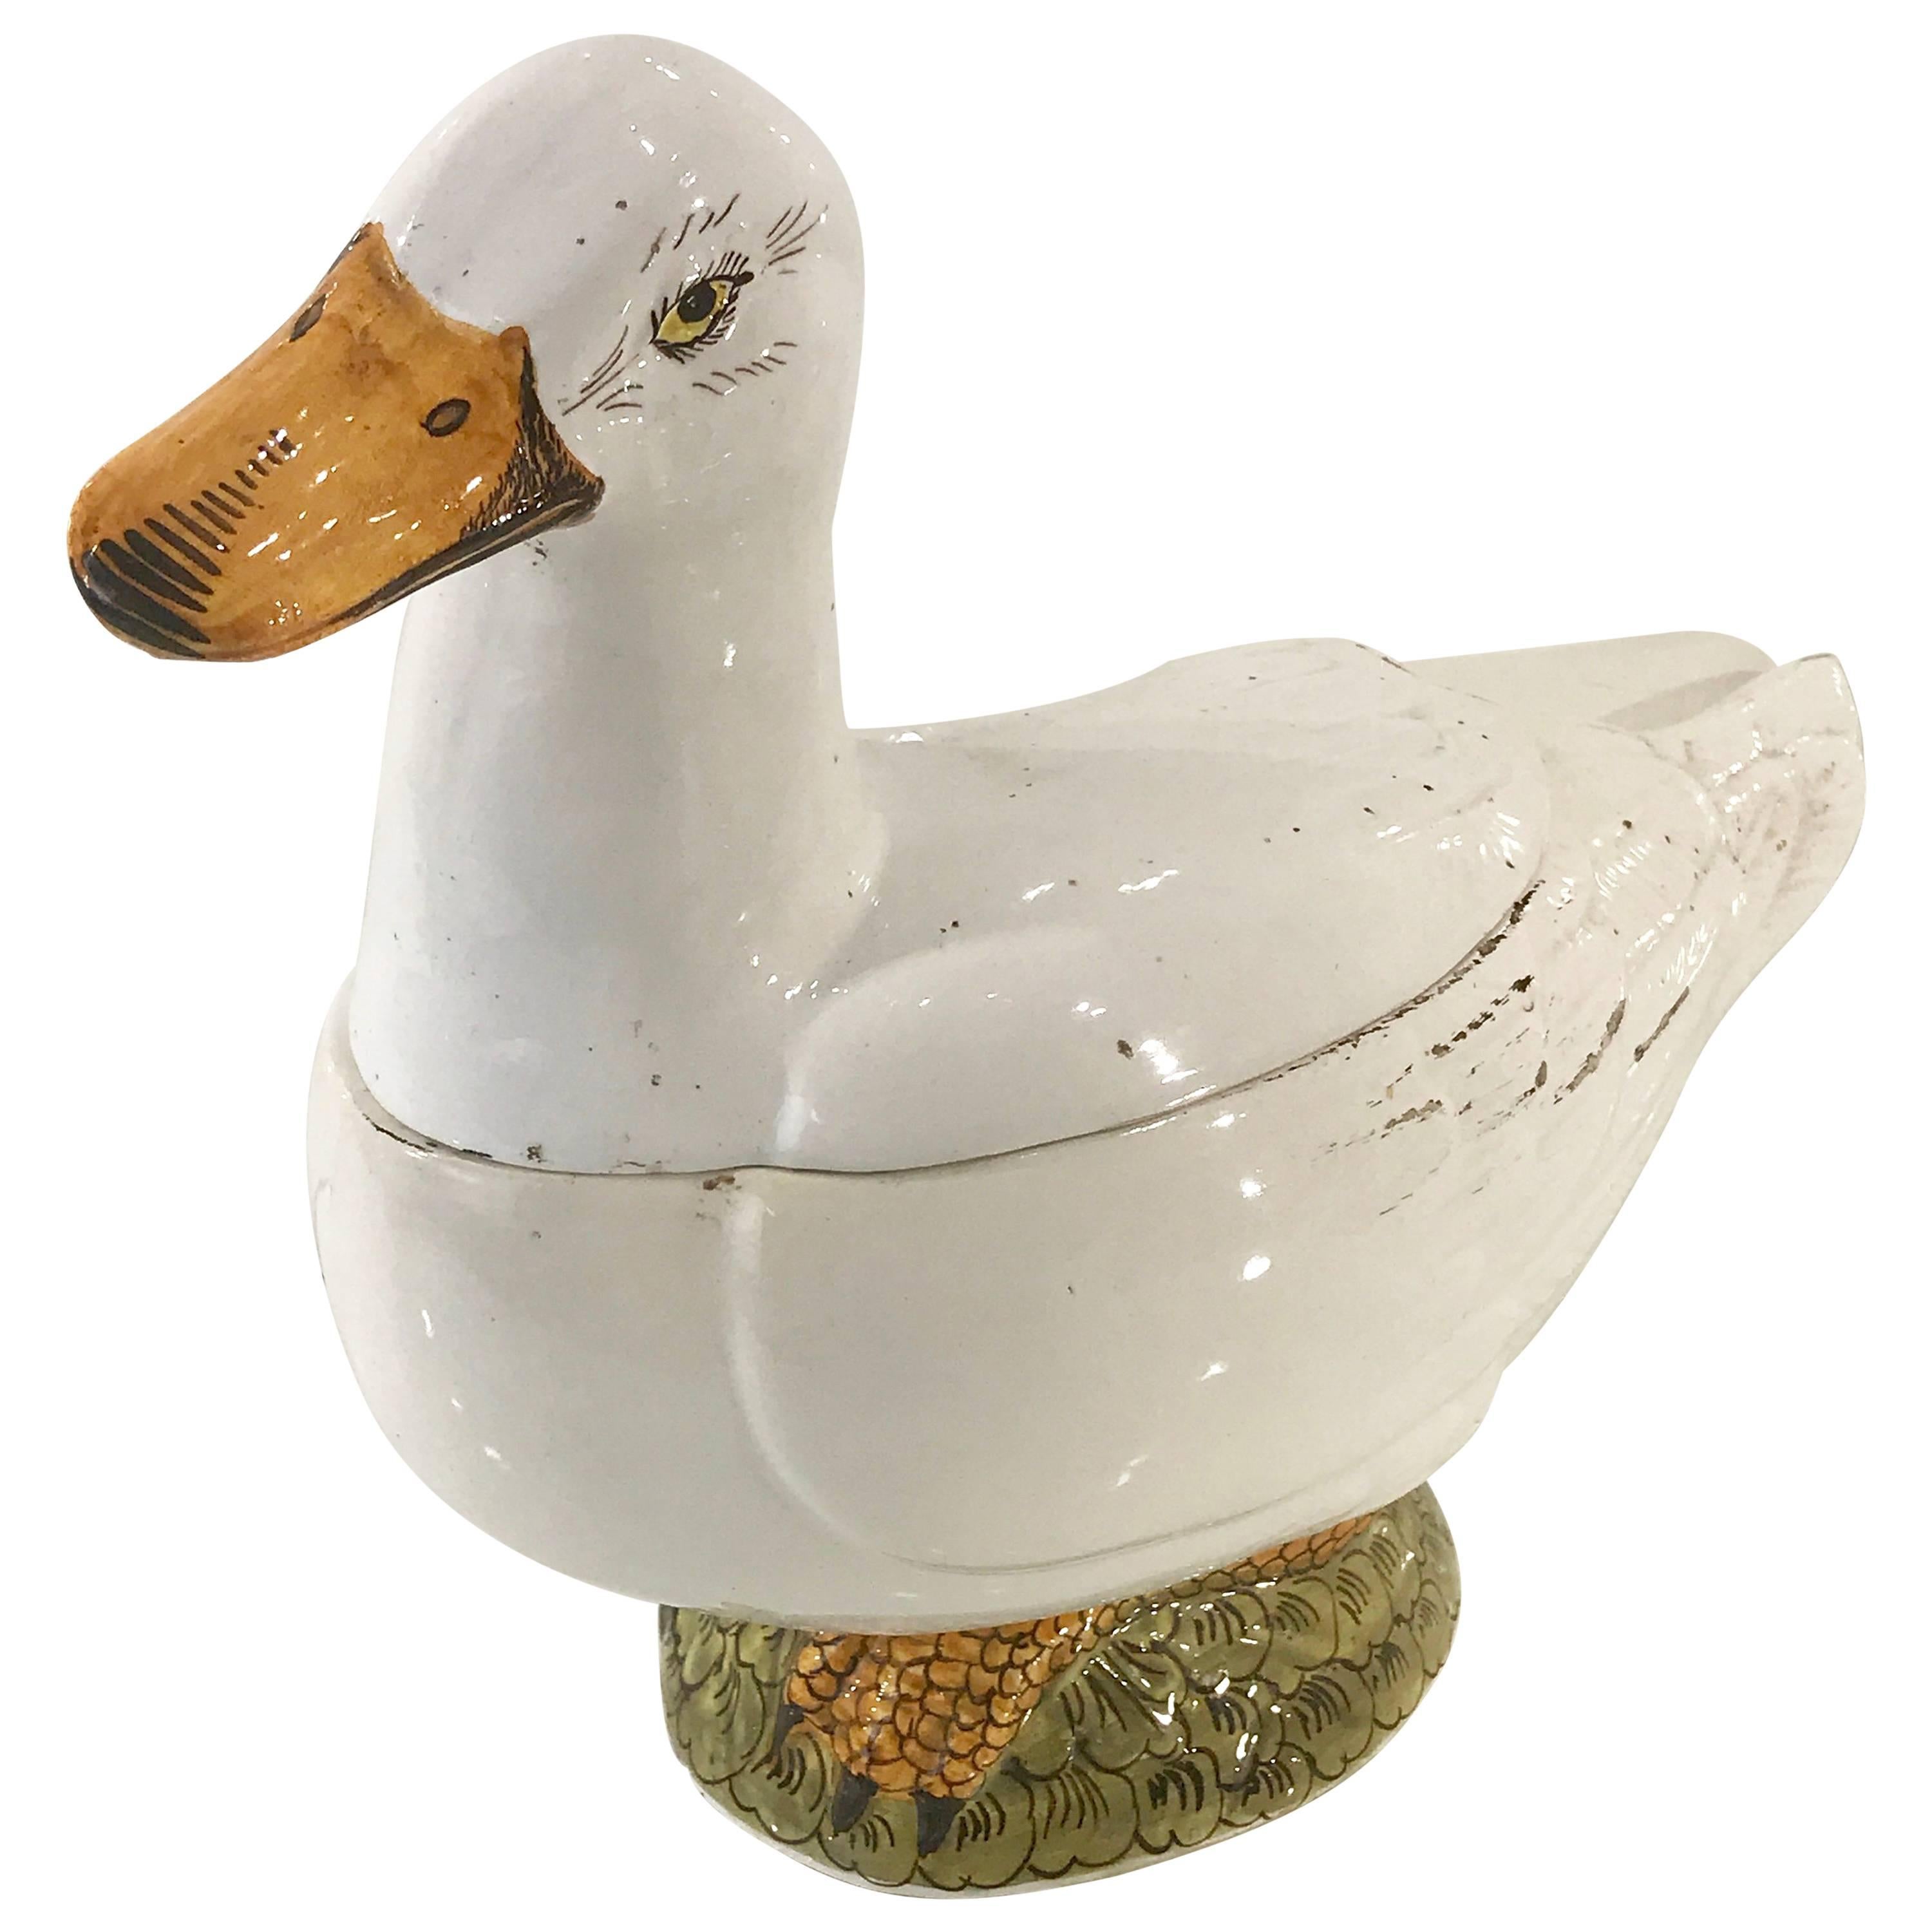 Betsy Bloomingdale's Antique Continental Tin Glazed Soup Tureen of a Duck